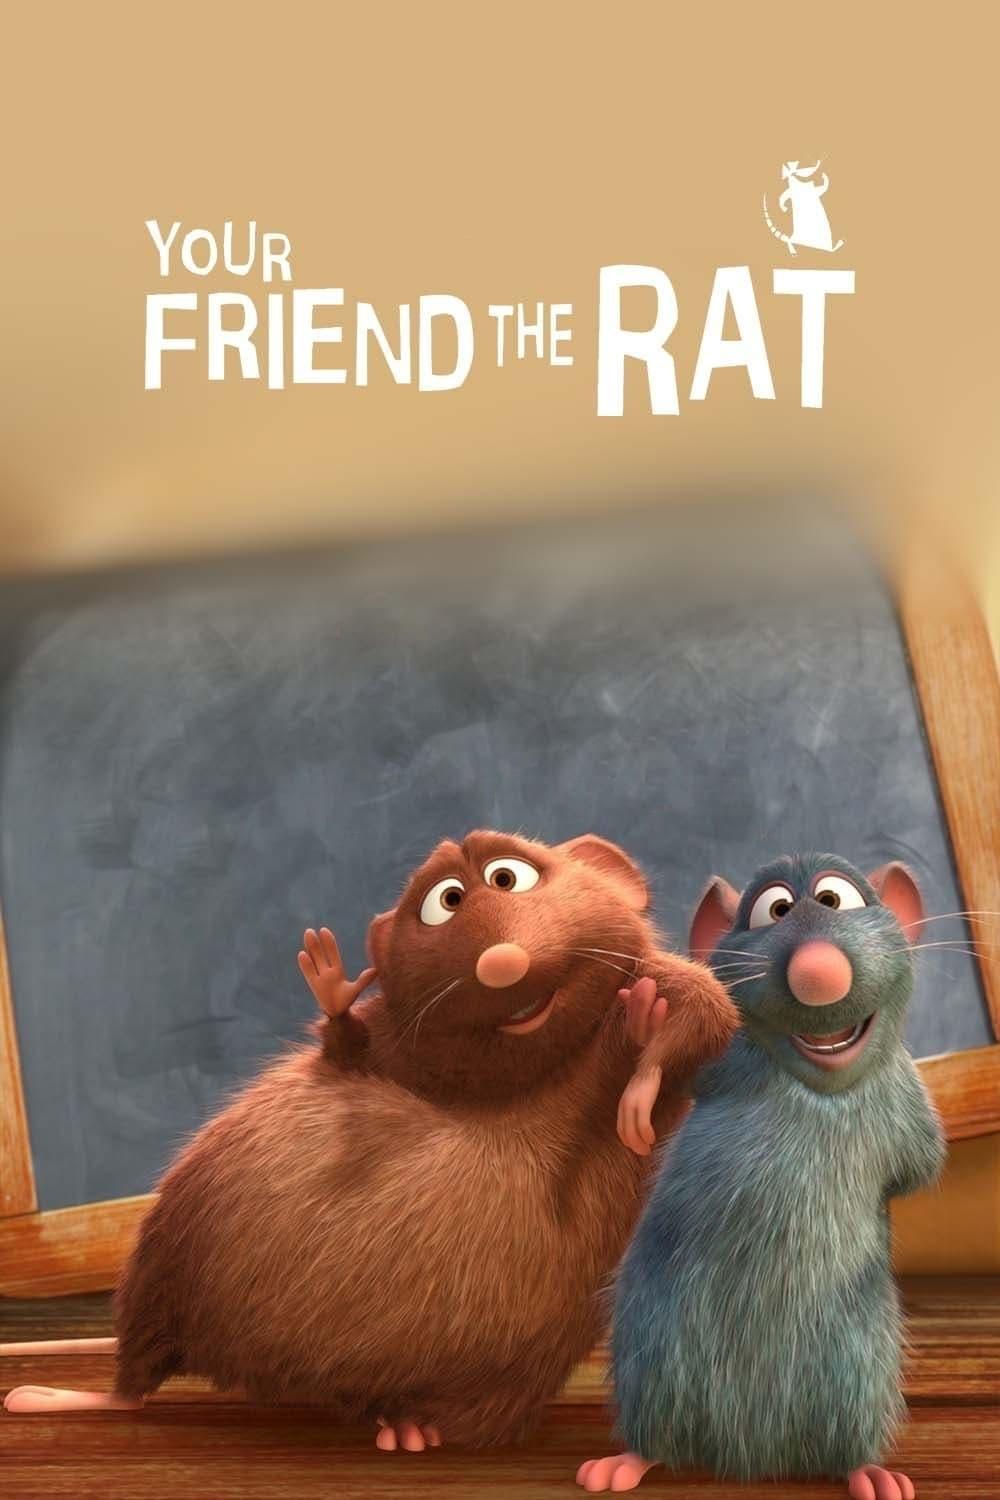 Your Friend the Rat poster